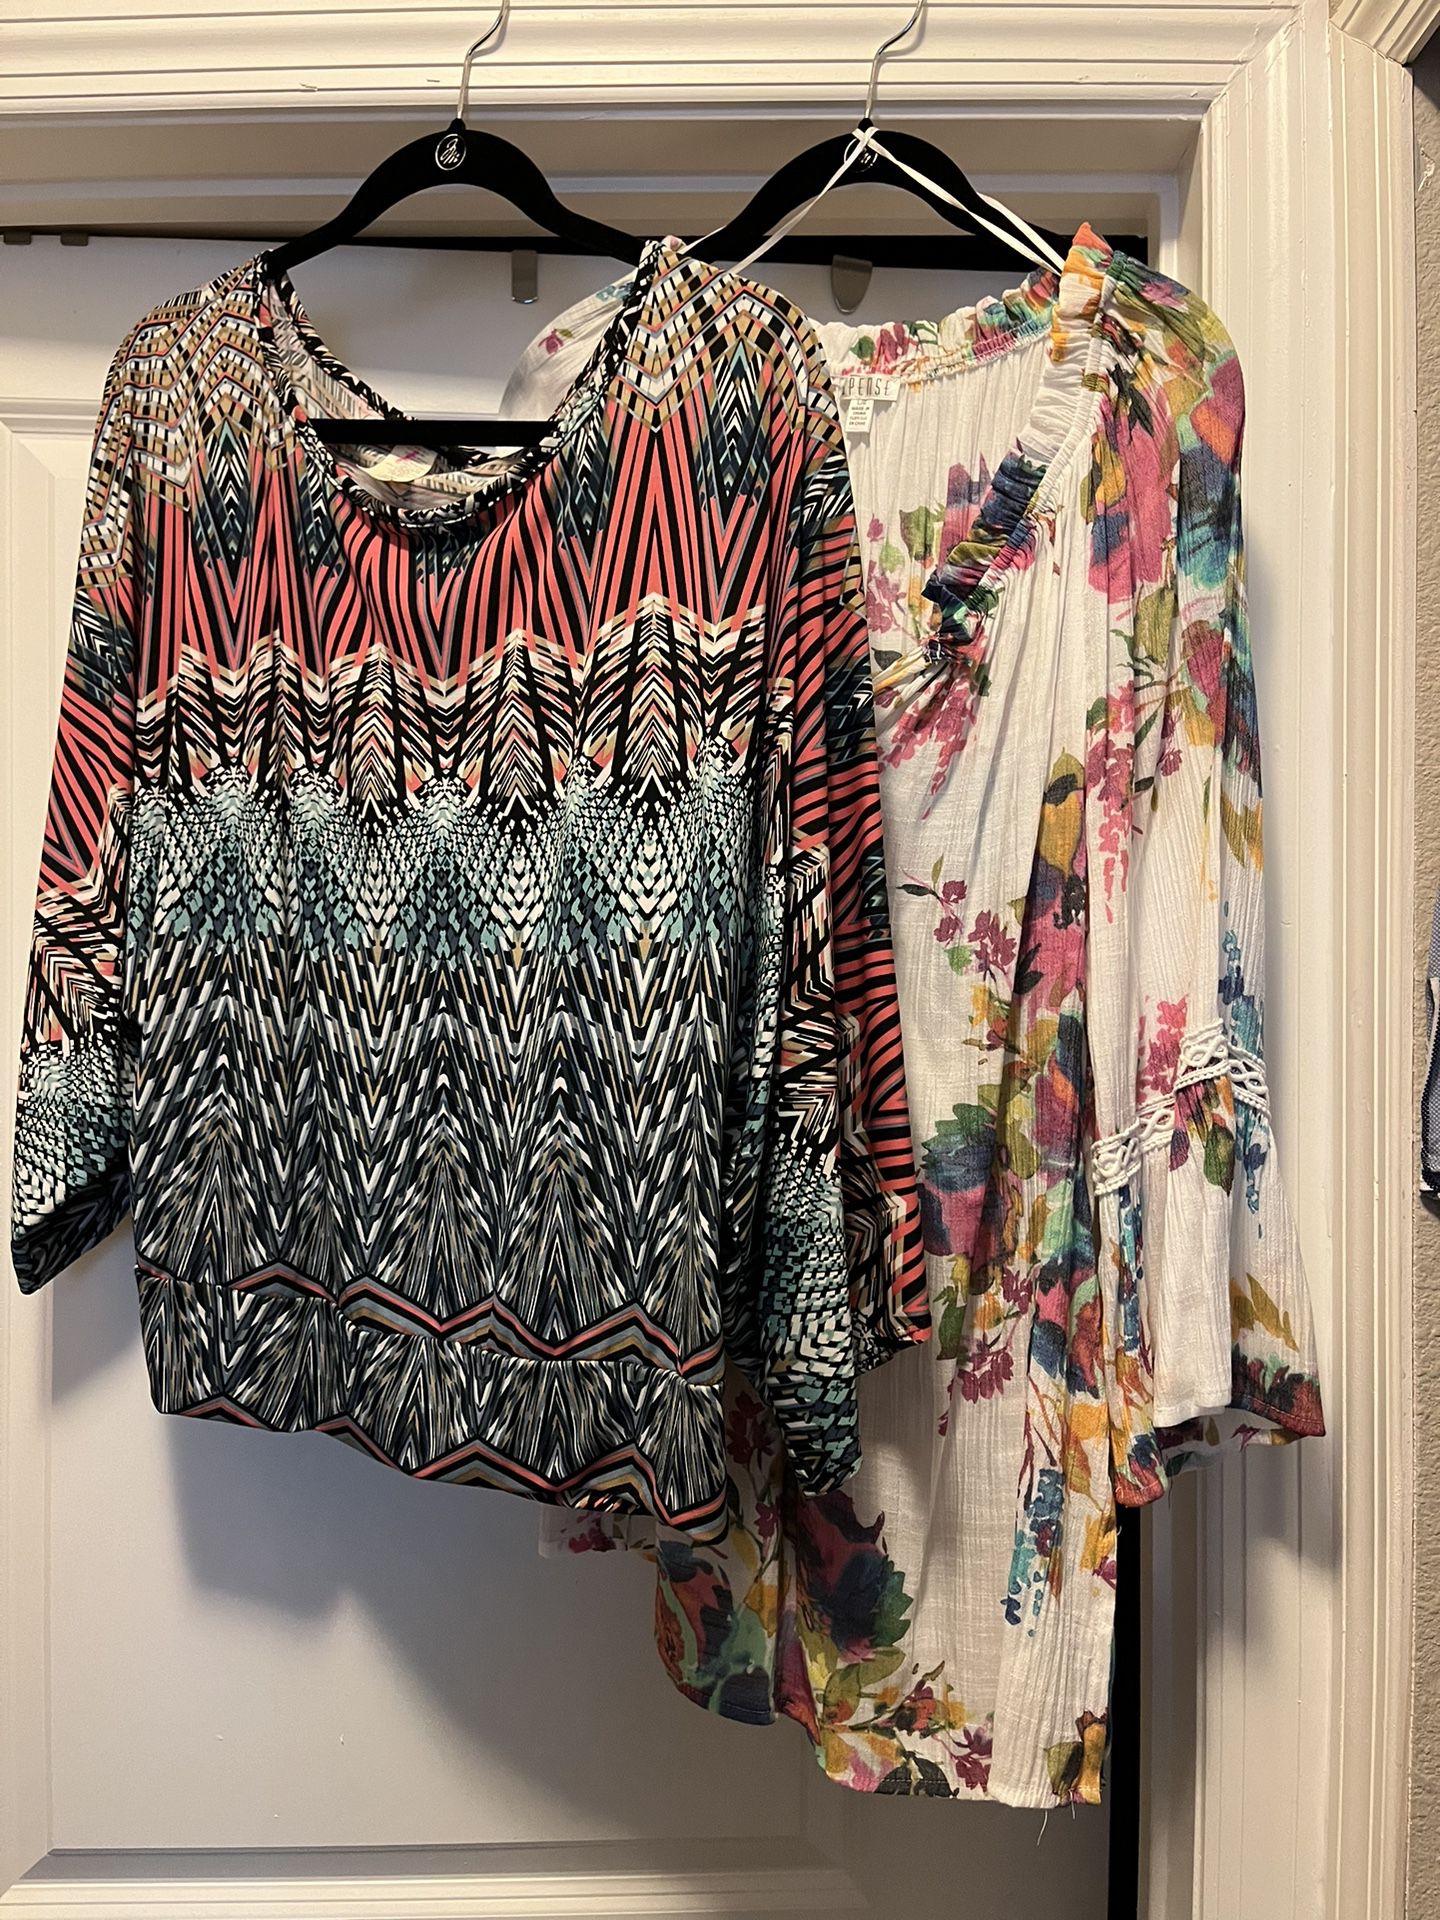 2 Women’s Tops For $6 Total